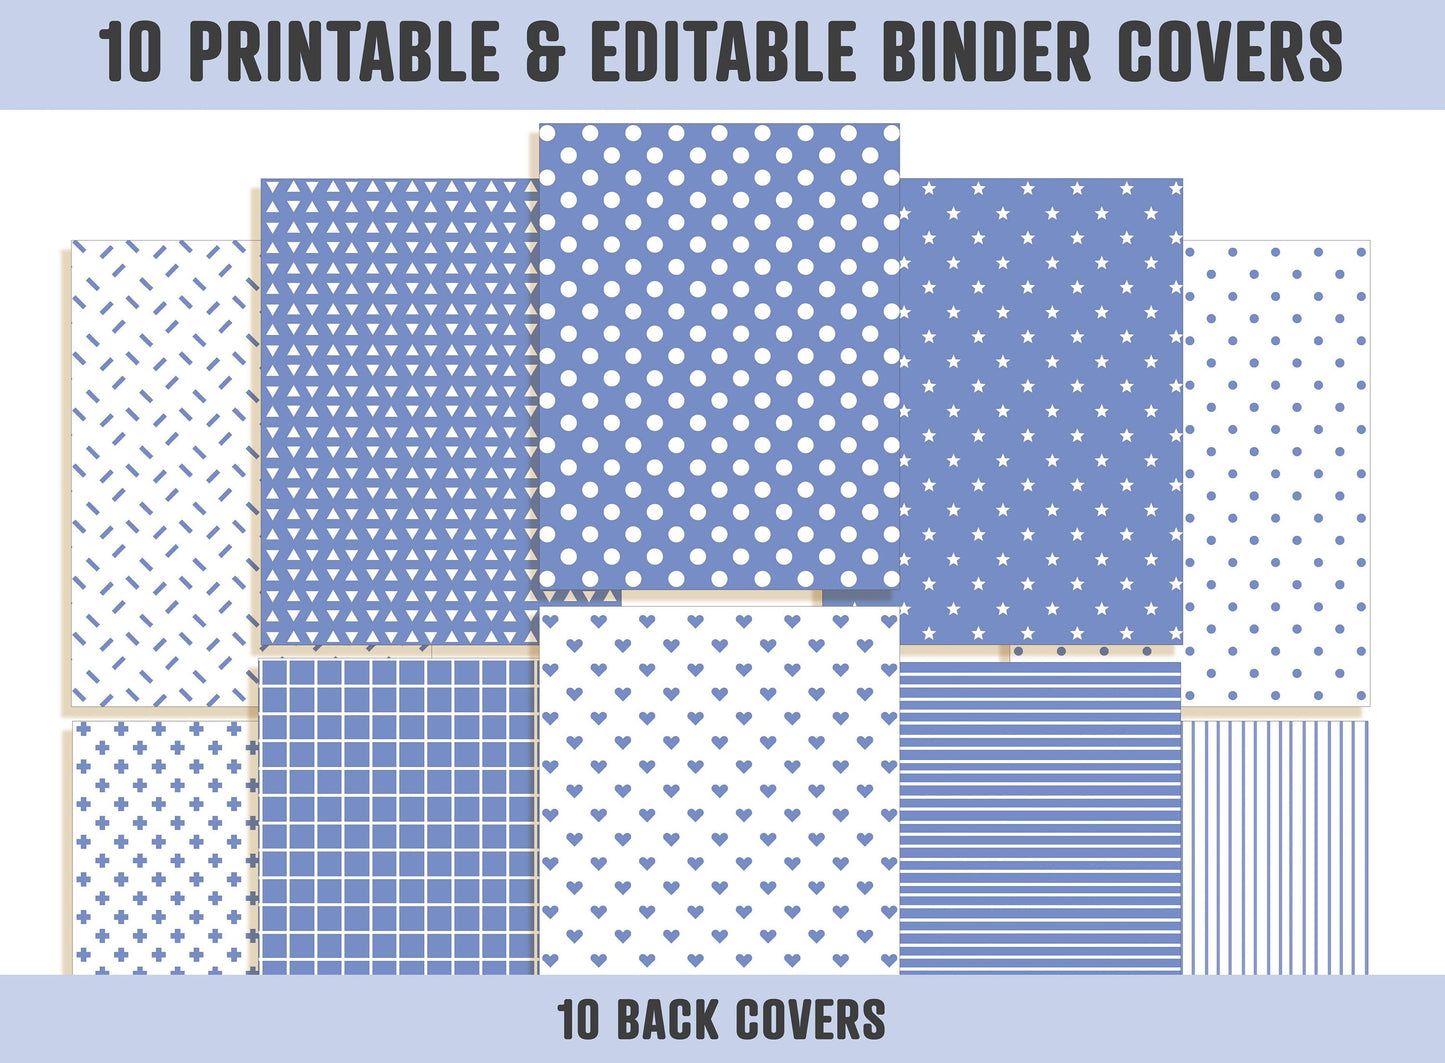 Planner Cover Page, 10 Editable Binder Covers and Spines, Binder Cover Printable, Teacher/School Binder Page, Binder Inserts, Template, PDF